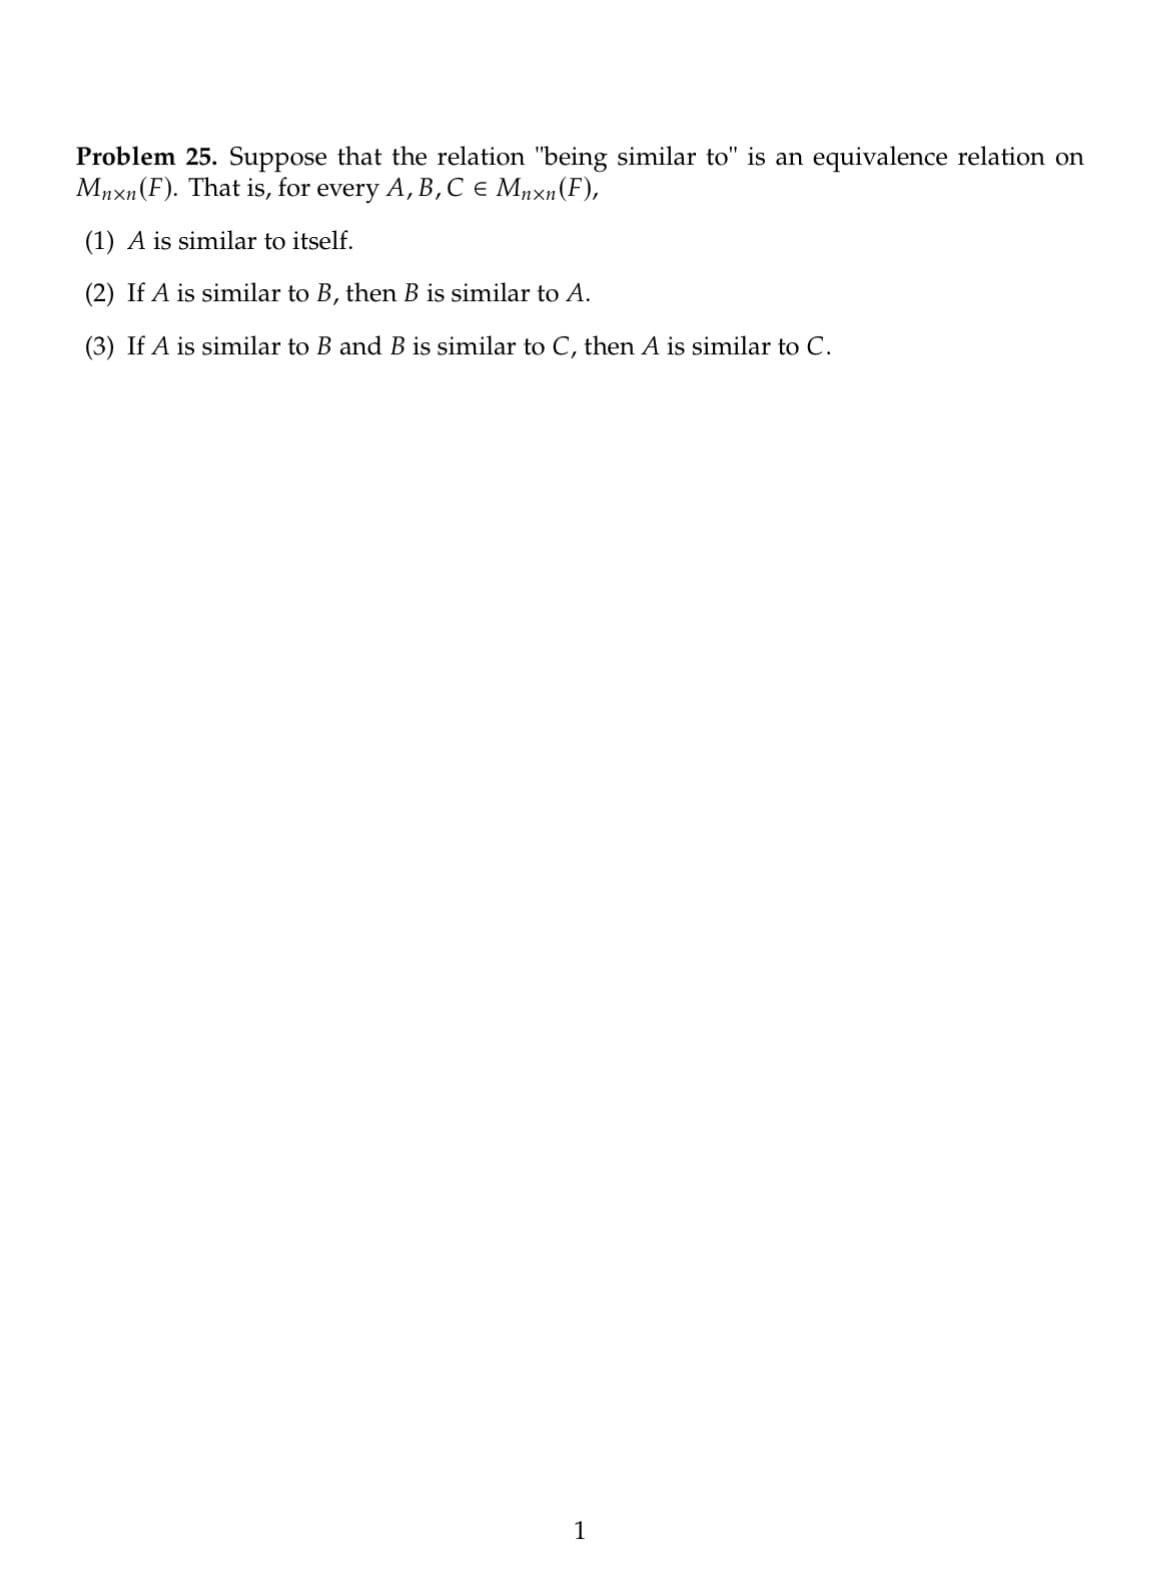 Problem 25. Suppose that the relation "being similar to" is an equivalence relation on
Mnxn (F). That is, for every A, B, C € Mnxn (F),
(1) A is similar to itself.
(2) If A is similar to B, then B is similar to A.
(3) If A is similar to B and B is similar to C, then A is similar to C.
1